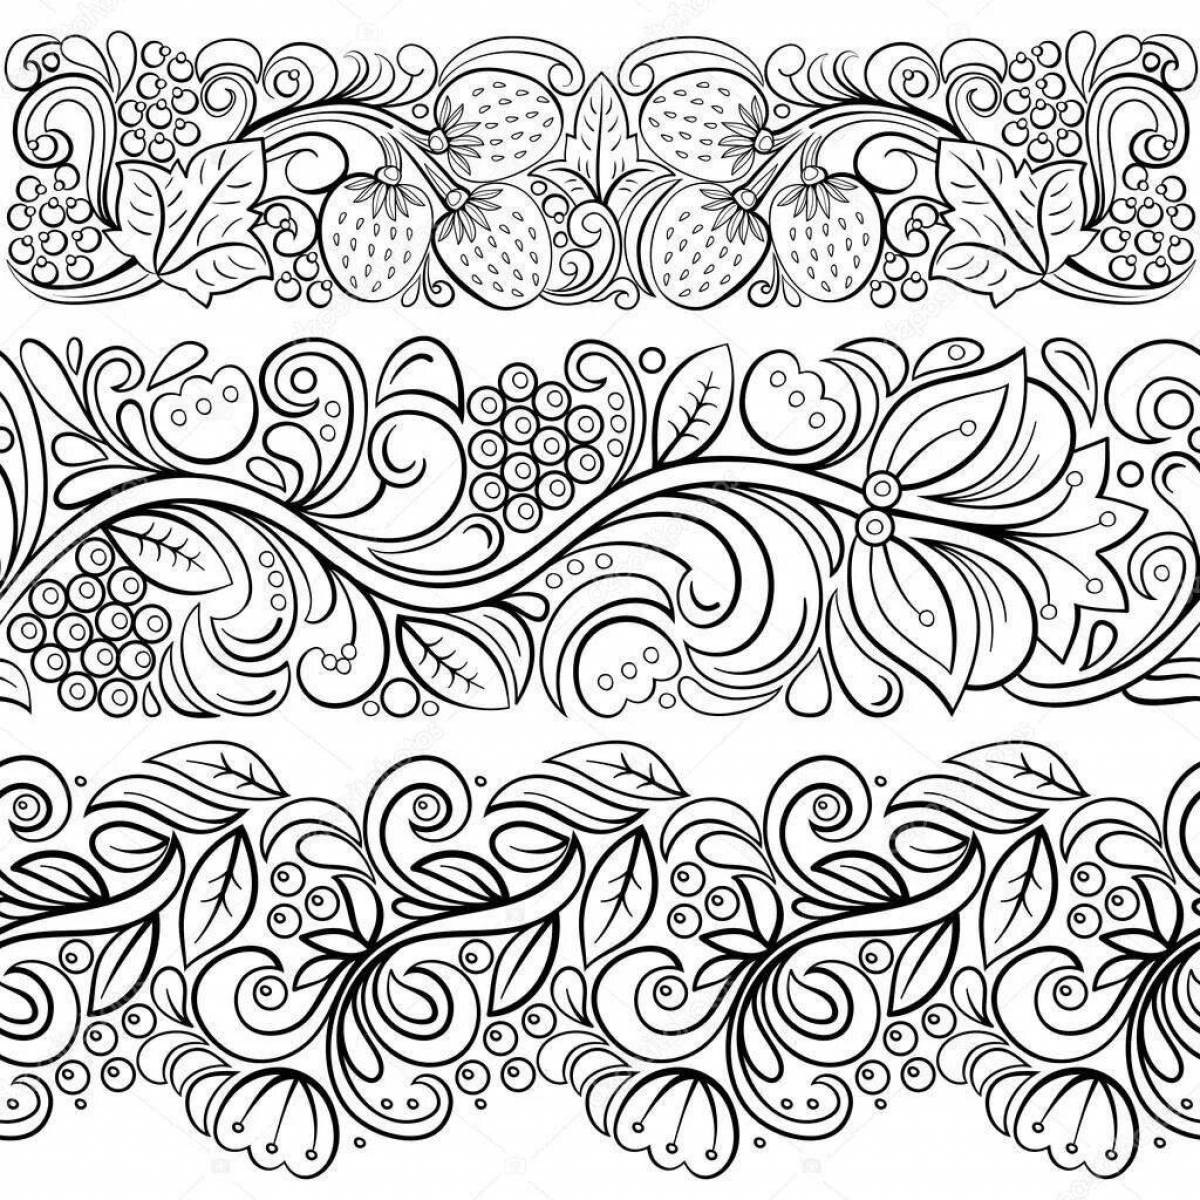 Coloring page magnificent Russian ornament